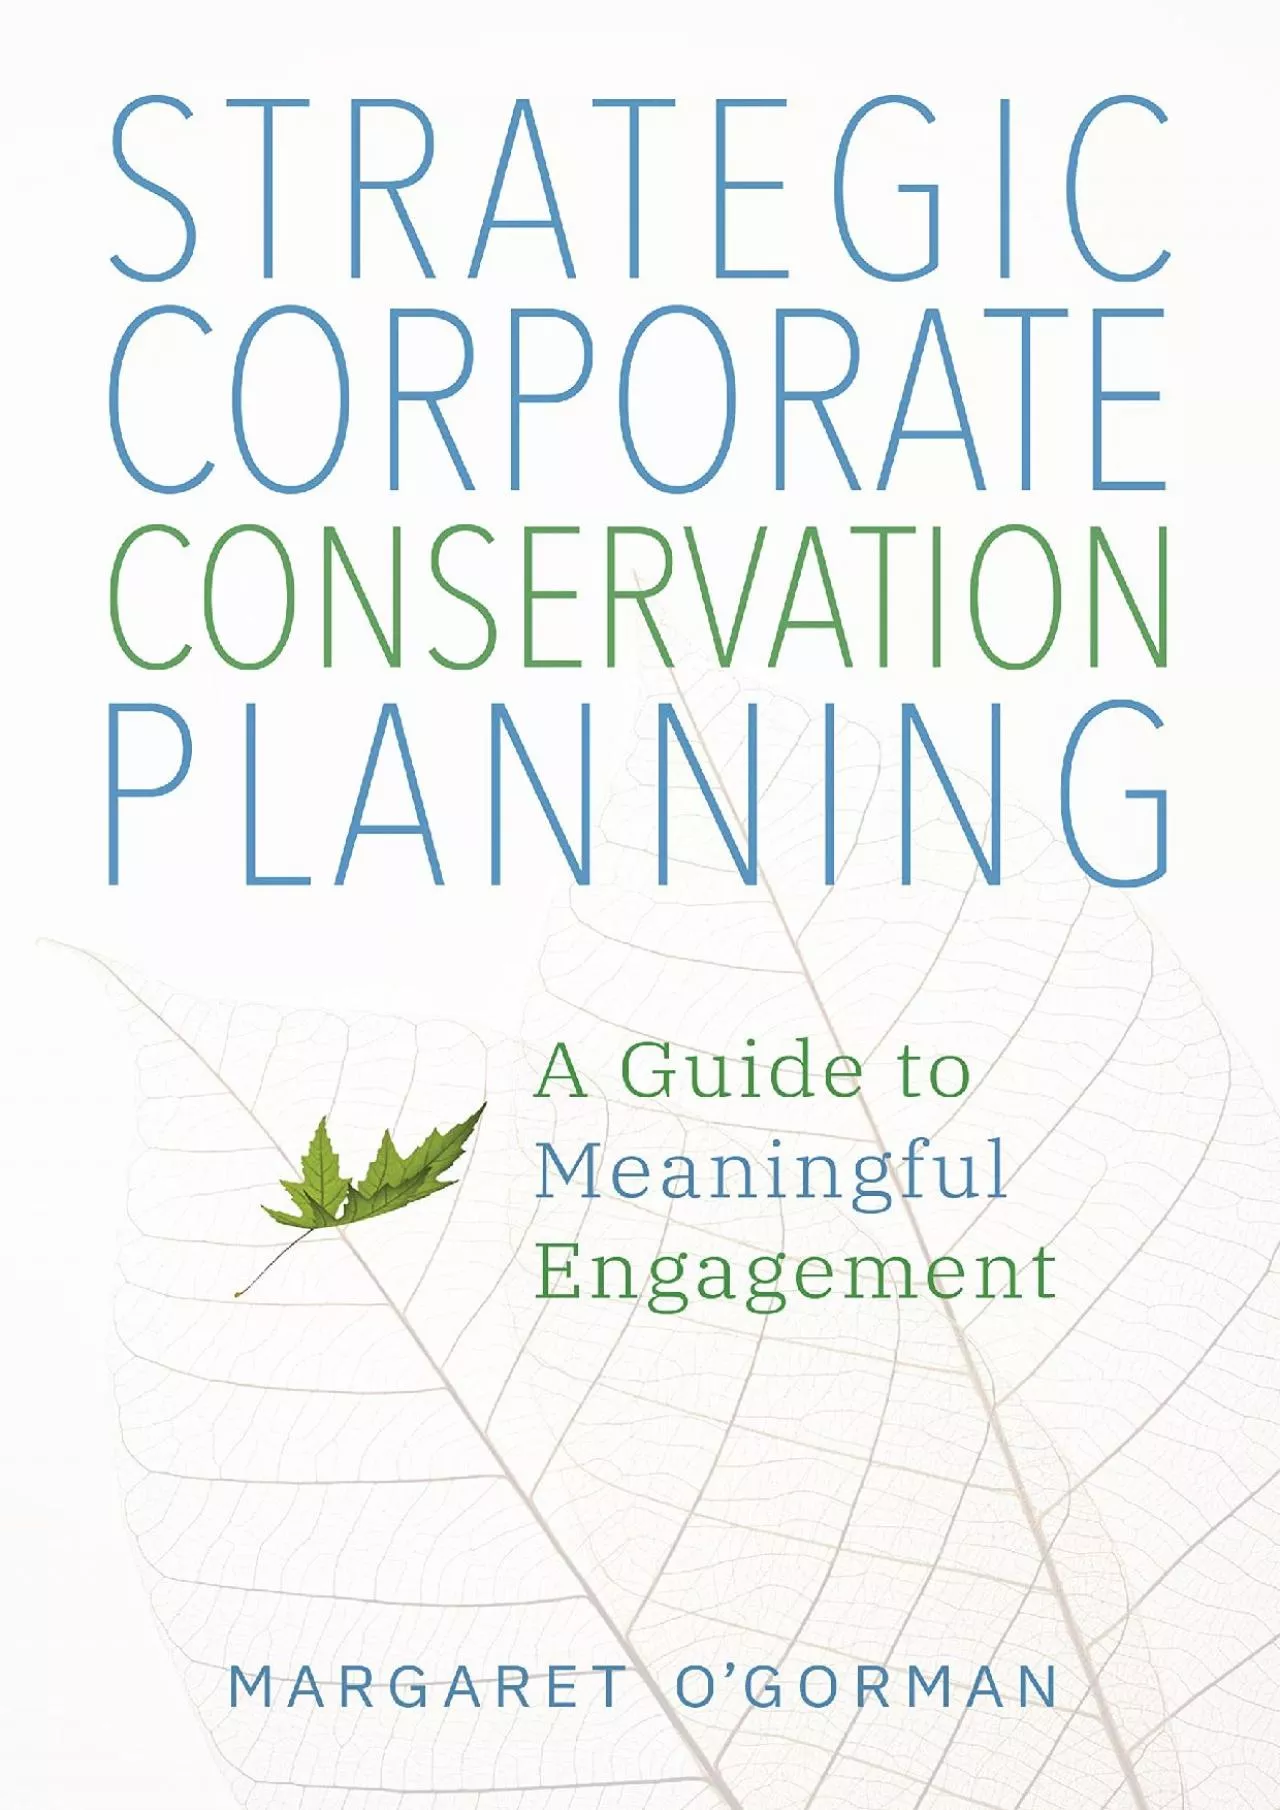 (EBOOK)-Strategic Corporate Conservation Planning: A Guide to Meaningful Engagement